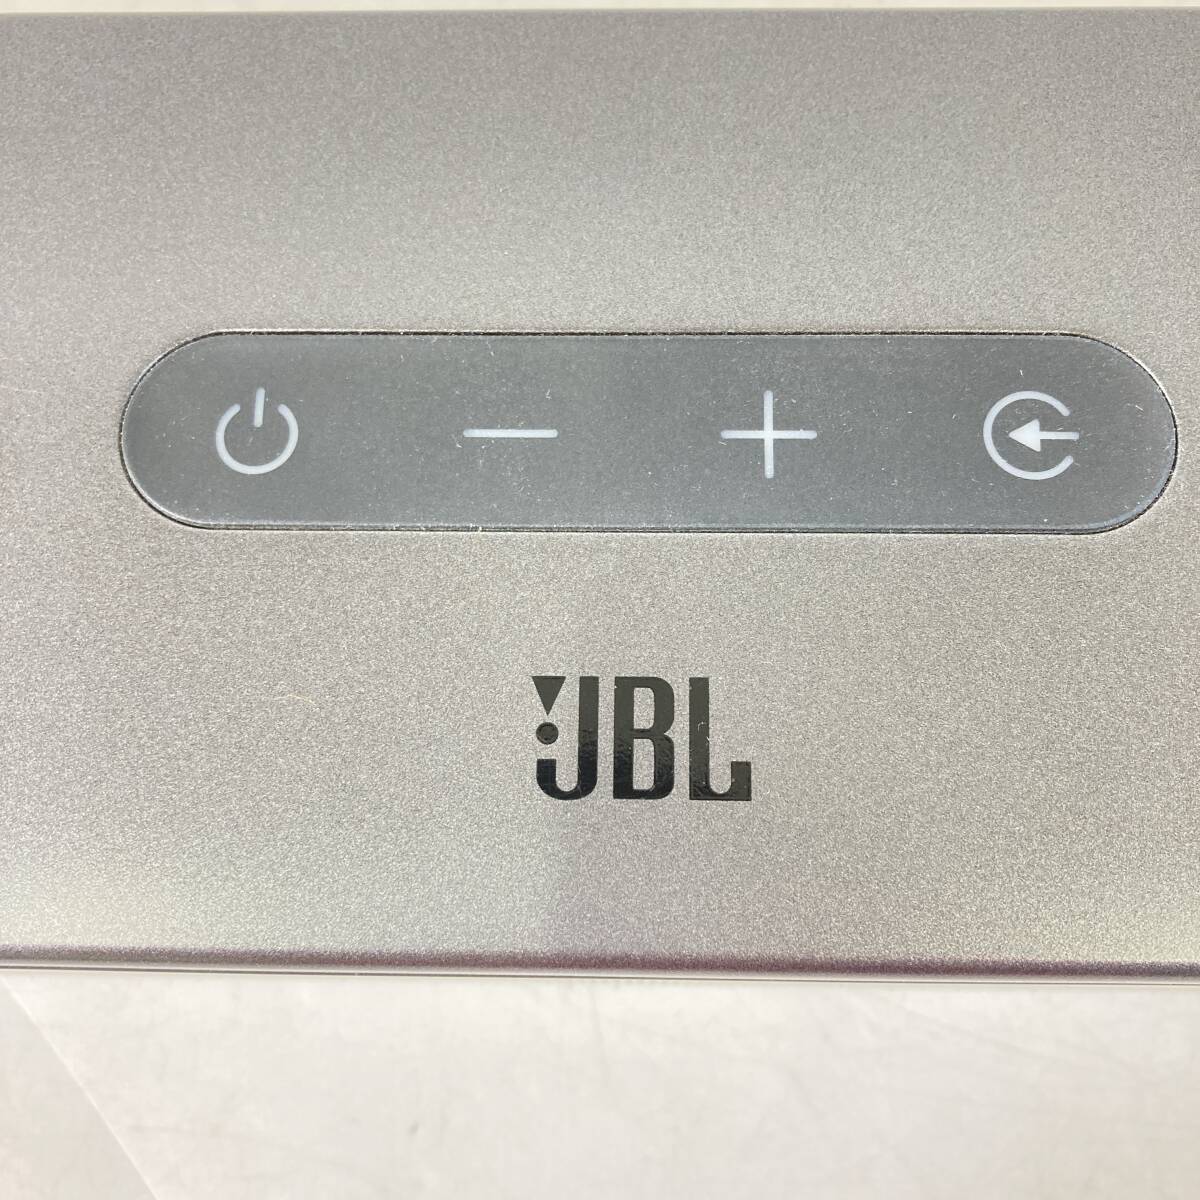 JBL BAR2.0 ALL IN ONE bus ref port installing home theater / sound bar conspicuous scratch dirt none roughly superior article accessory have 